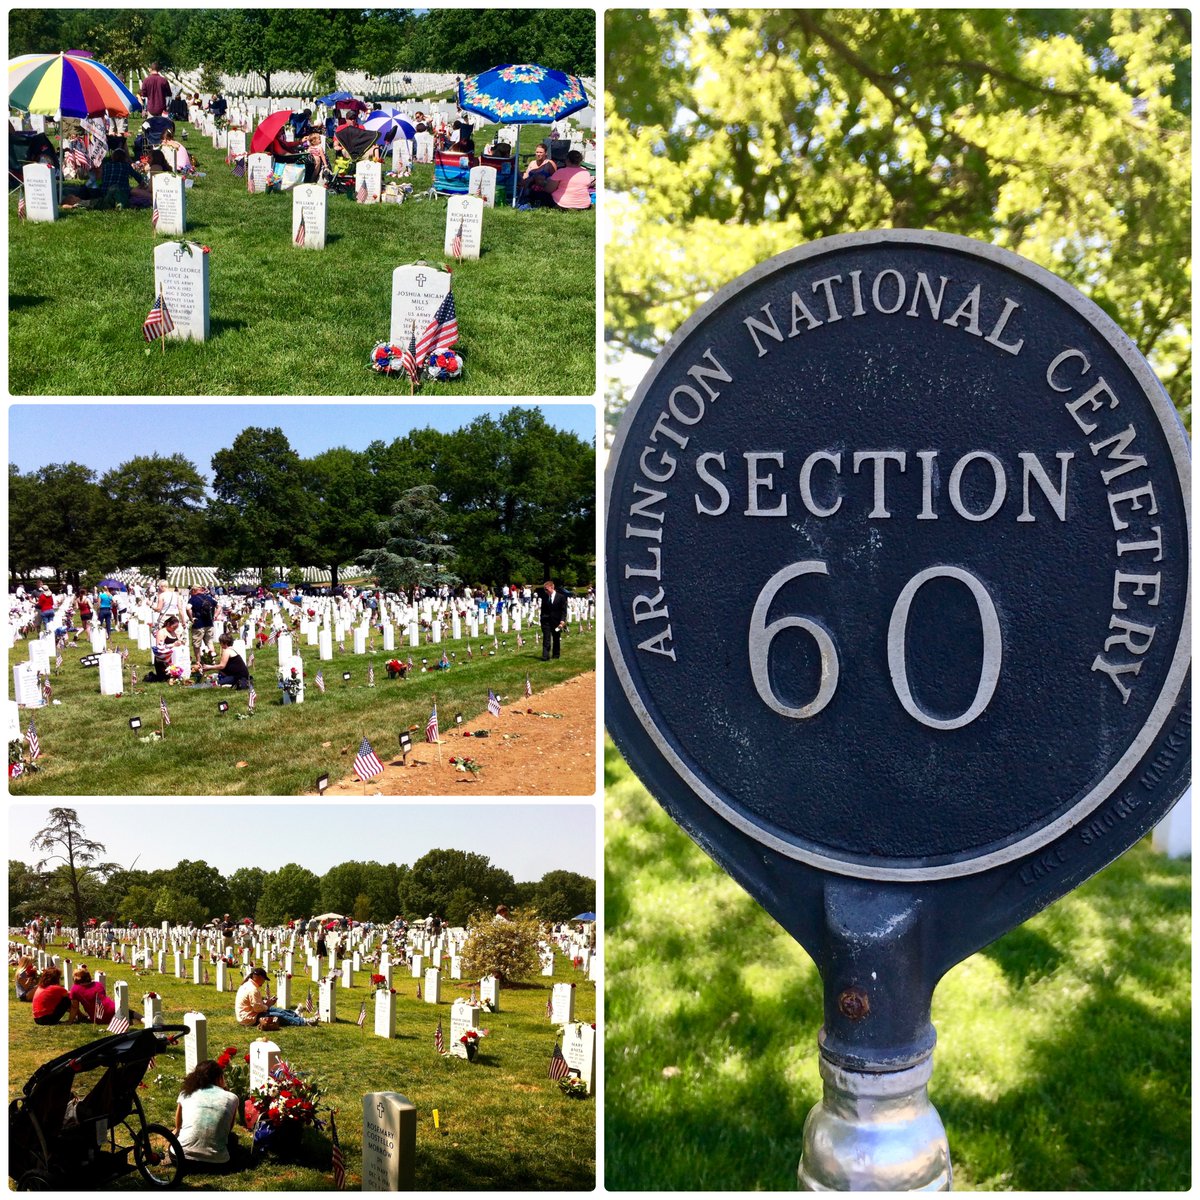 I'll be in #WashingtonDC to visit #ArlingtonNationalCemetery on #MemorialDay. This is my 14th year visiting grave sites for friends and acquaintances that can’t make it to #ANC. 

Do you have a friend or loved one you’d like me to visit? I’ll police the area, place a rose, take a